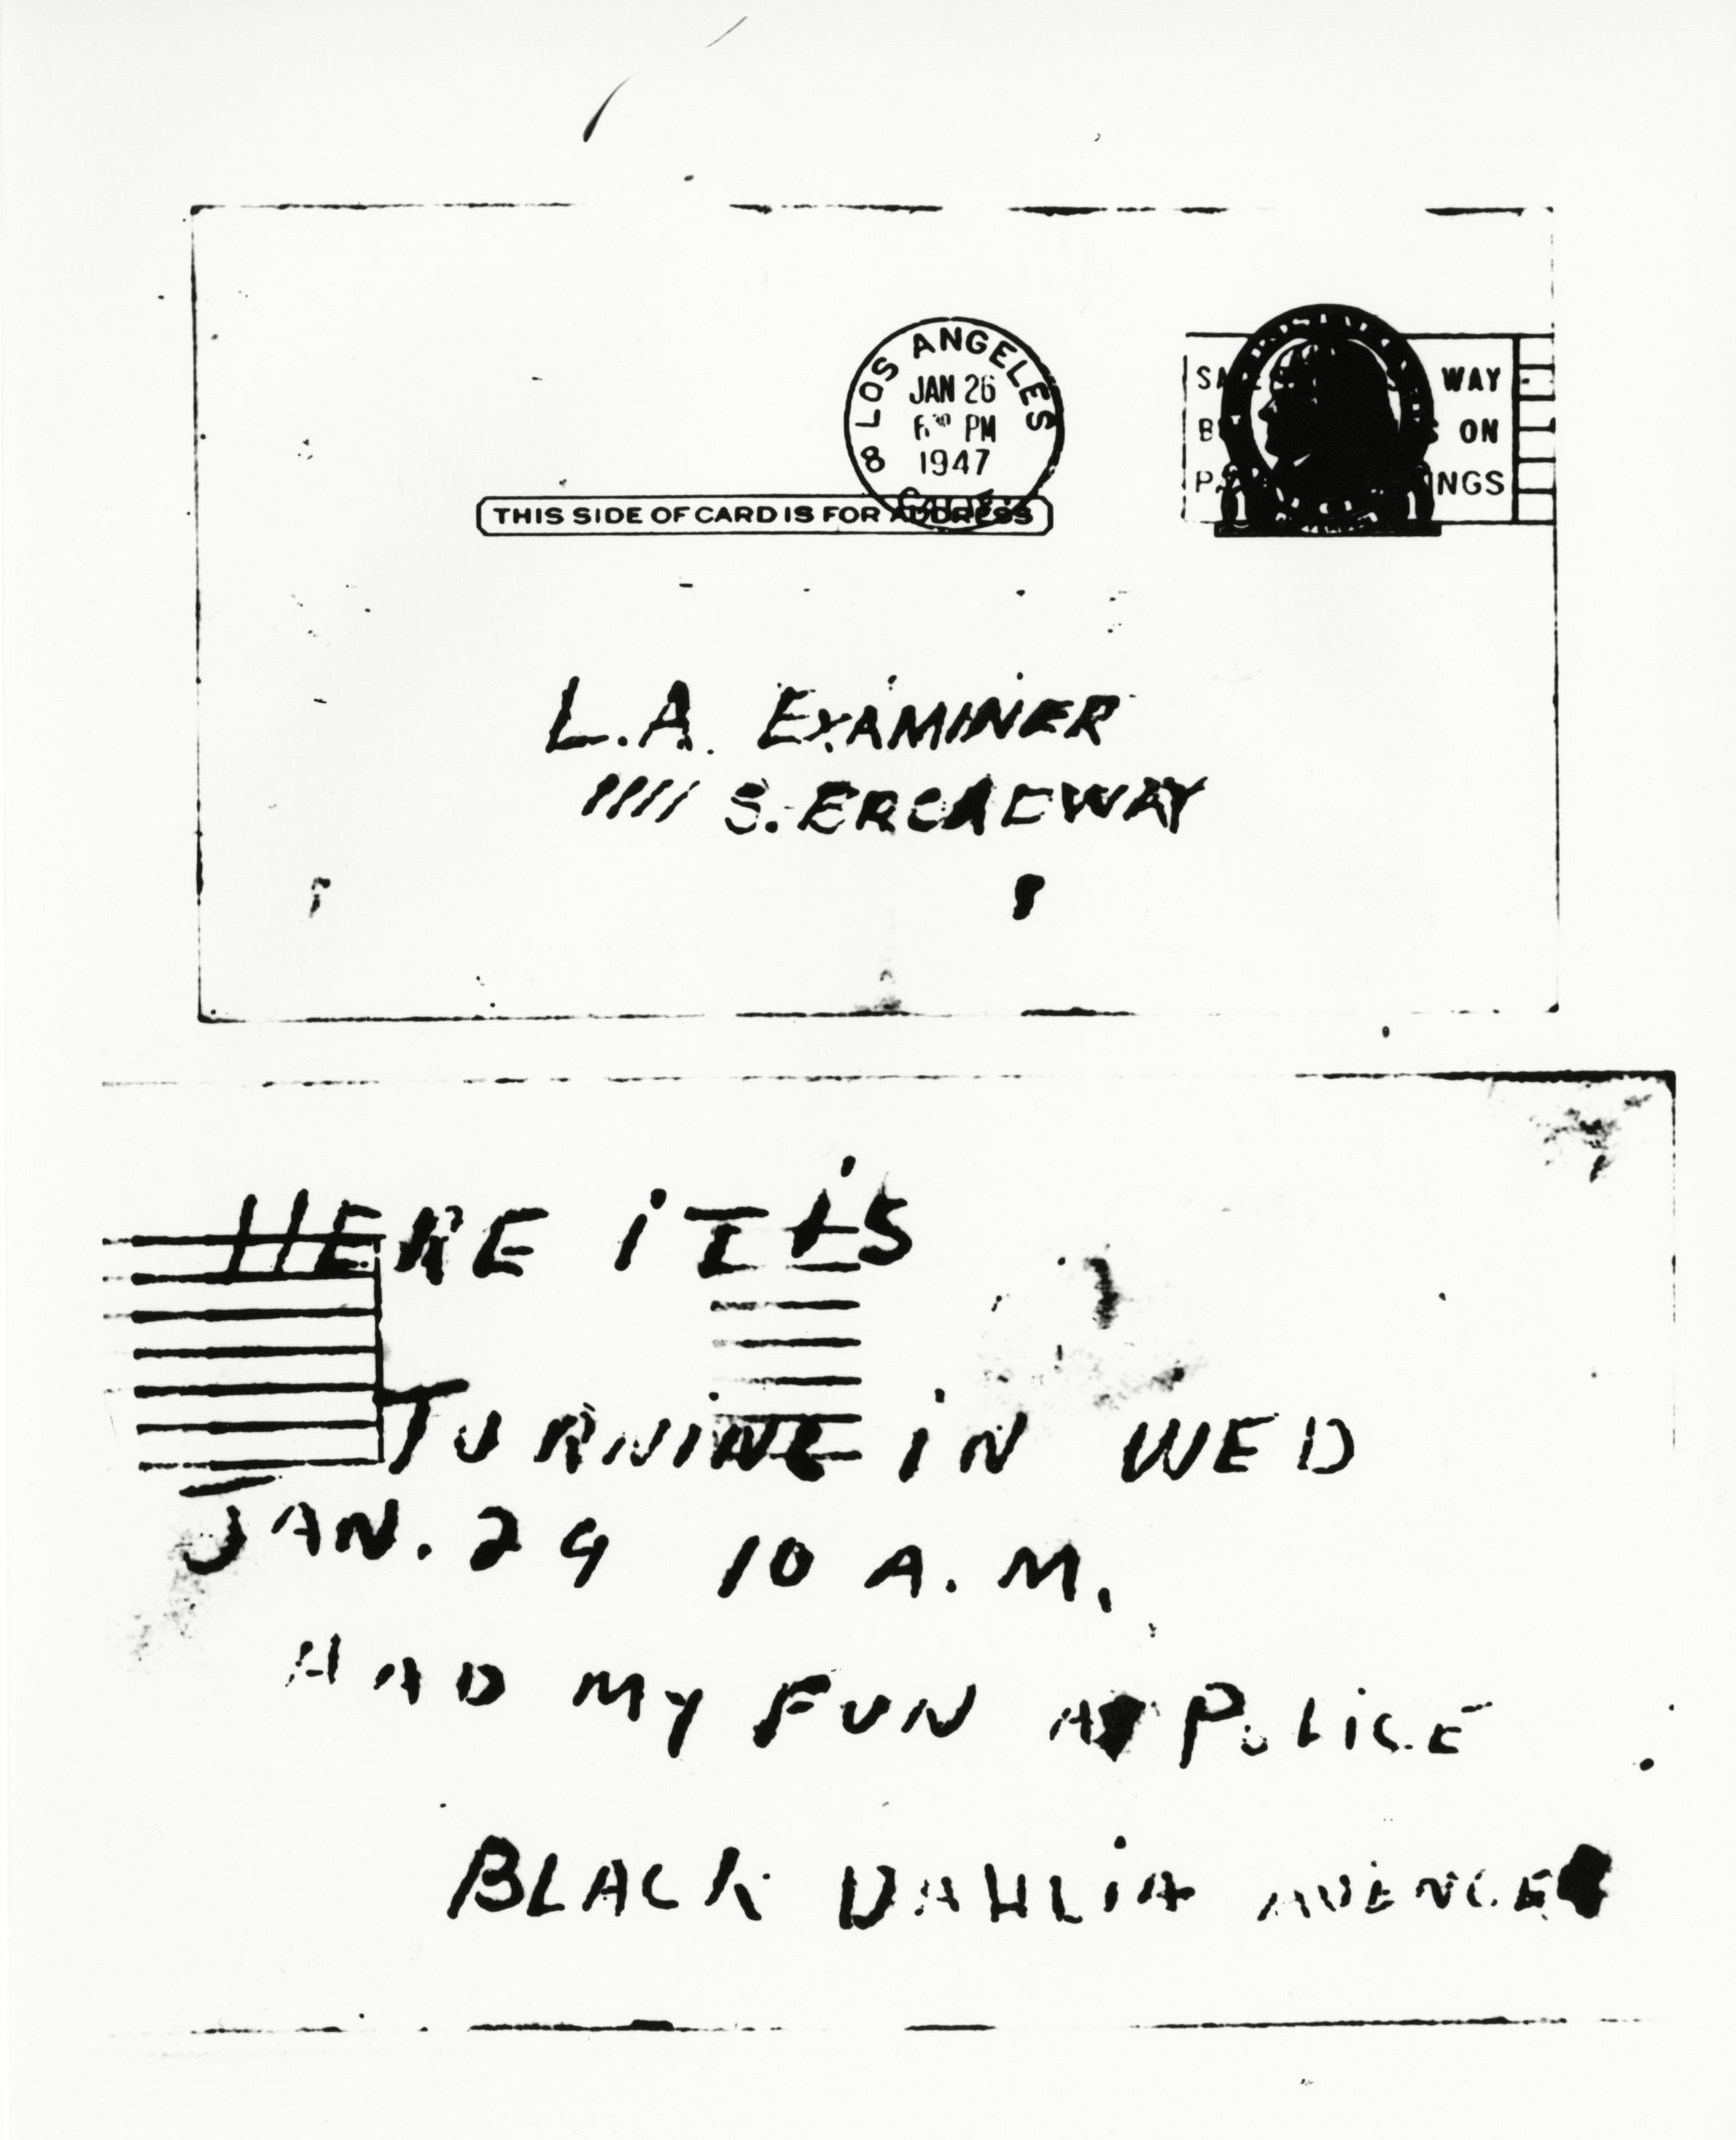 This postcard, purporting to be from the slayer of Elizabeth Short Case, was received by the Los Angeles examiner . The card was signed "Black Dahlia Avenger." The slain girl was known to her friends as the "Black Dahlia" because she usually wore black clothes